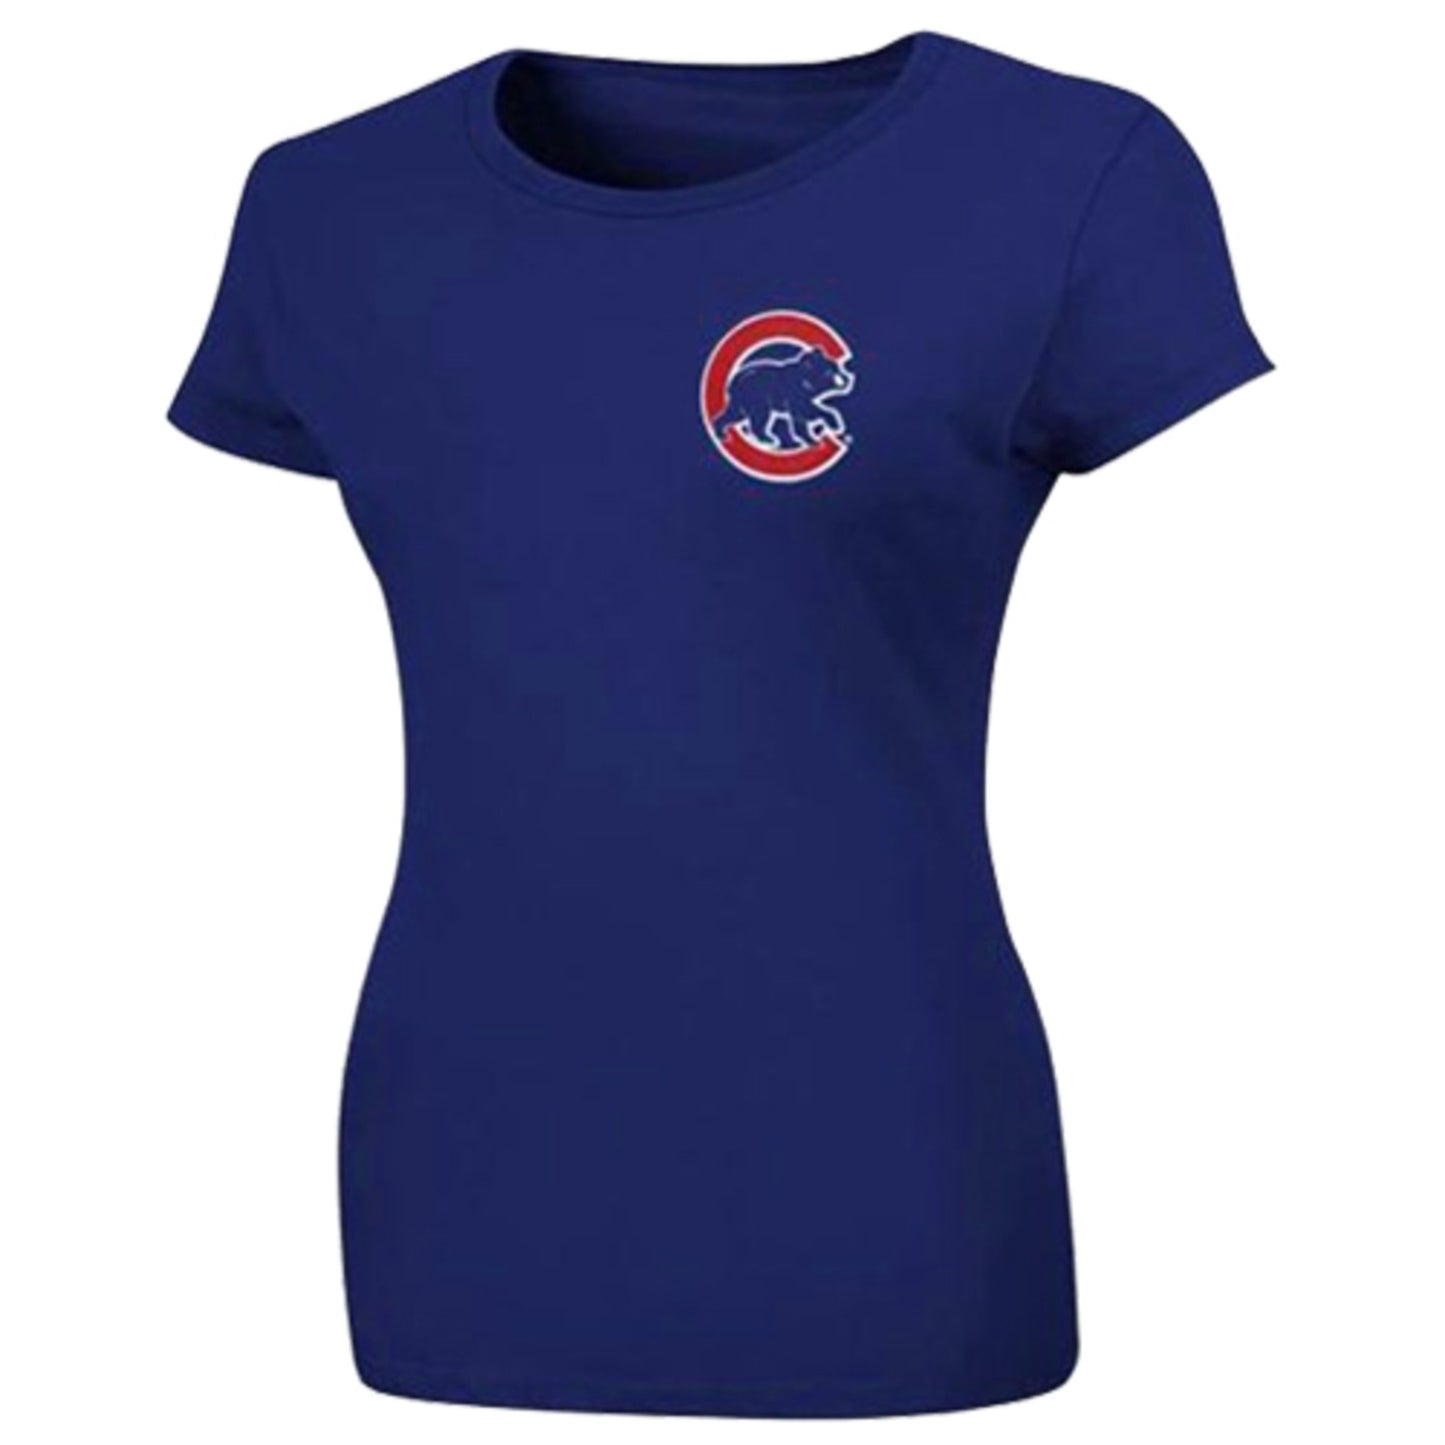 Women's Majestic Chicago Cubs Anthony Rizzo Name & Number Tee